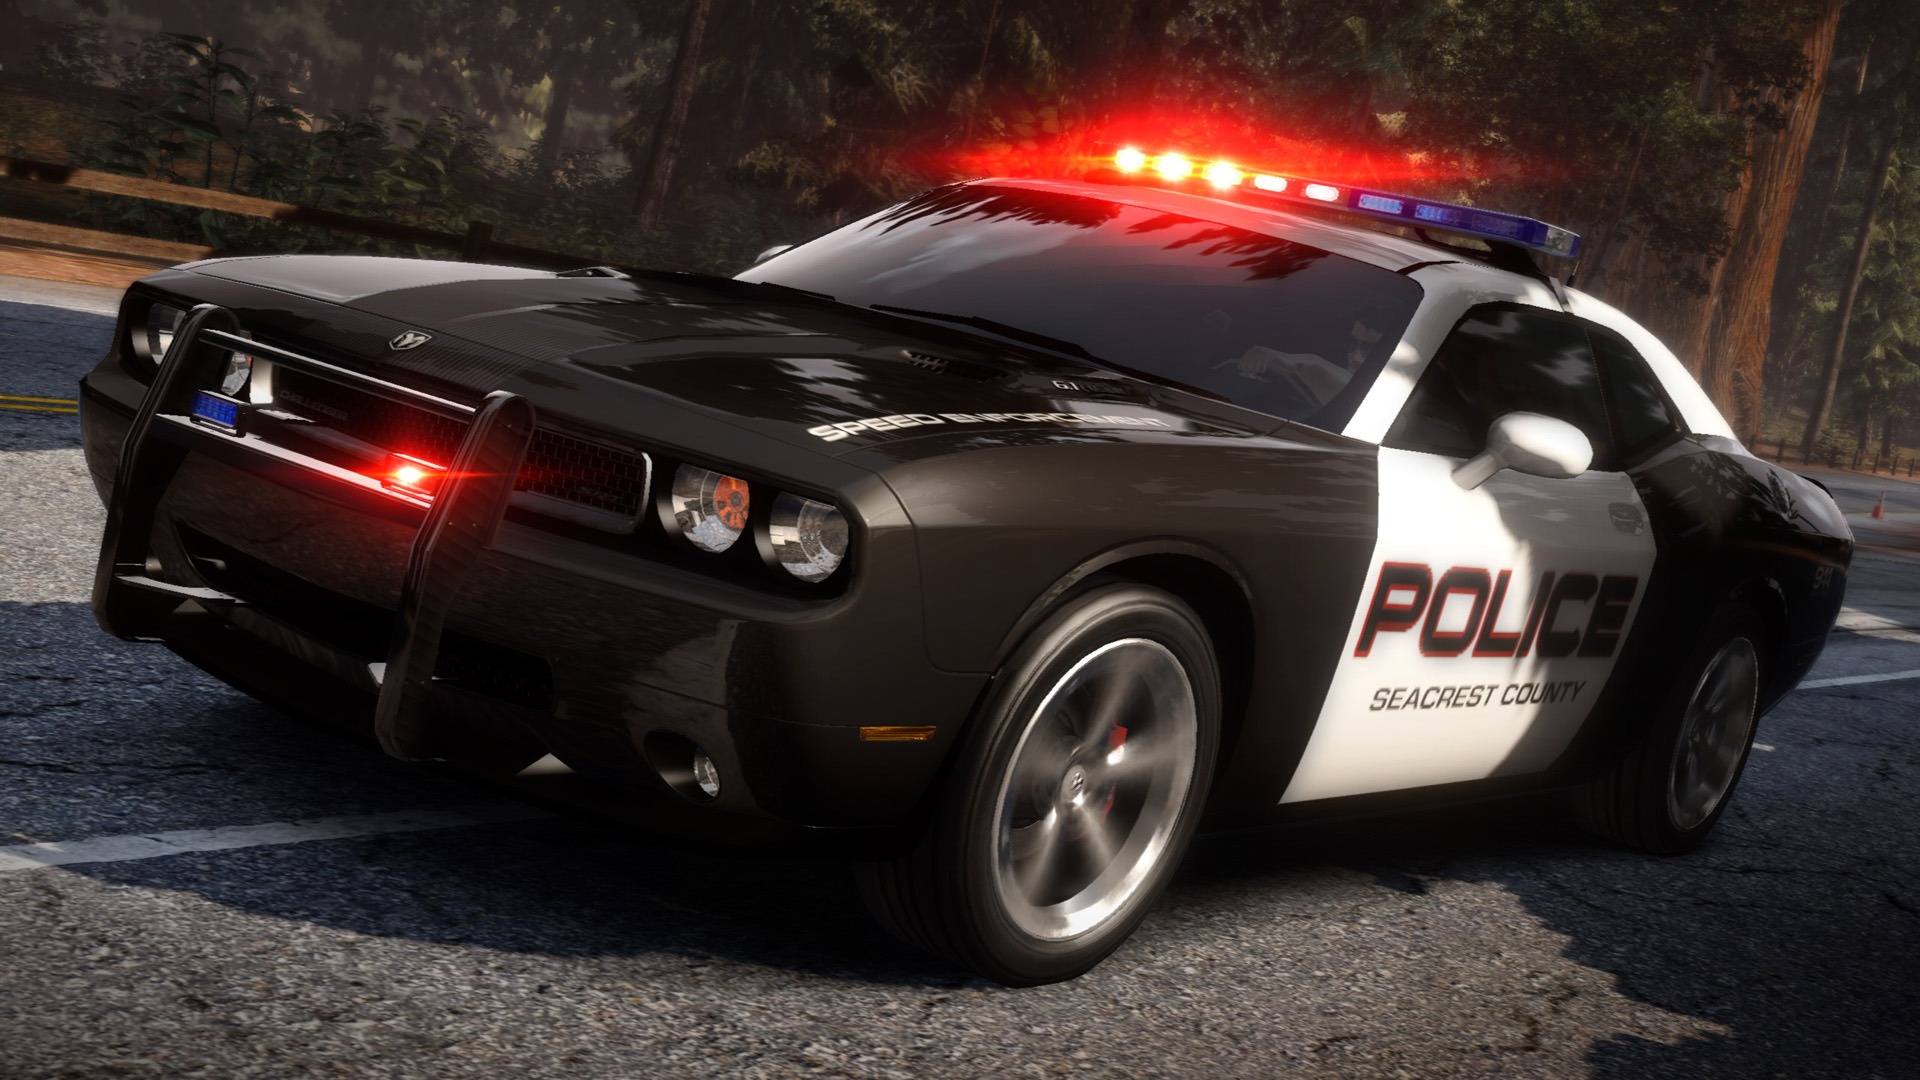 Need for Speed: Hot Pursuit 極品飛車14：熱力追踪 #10 - 1920x1080